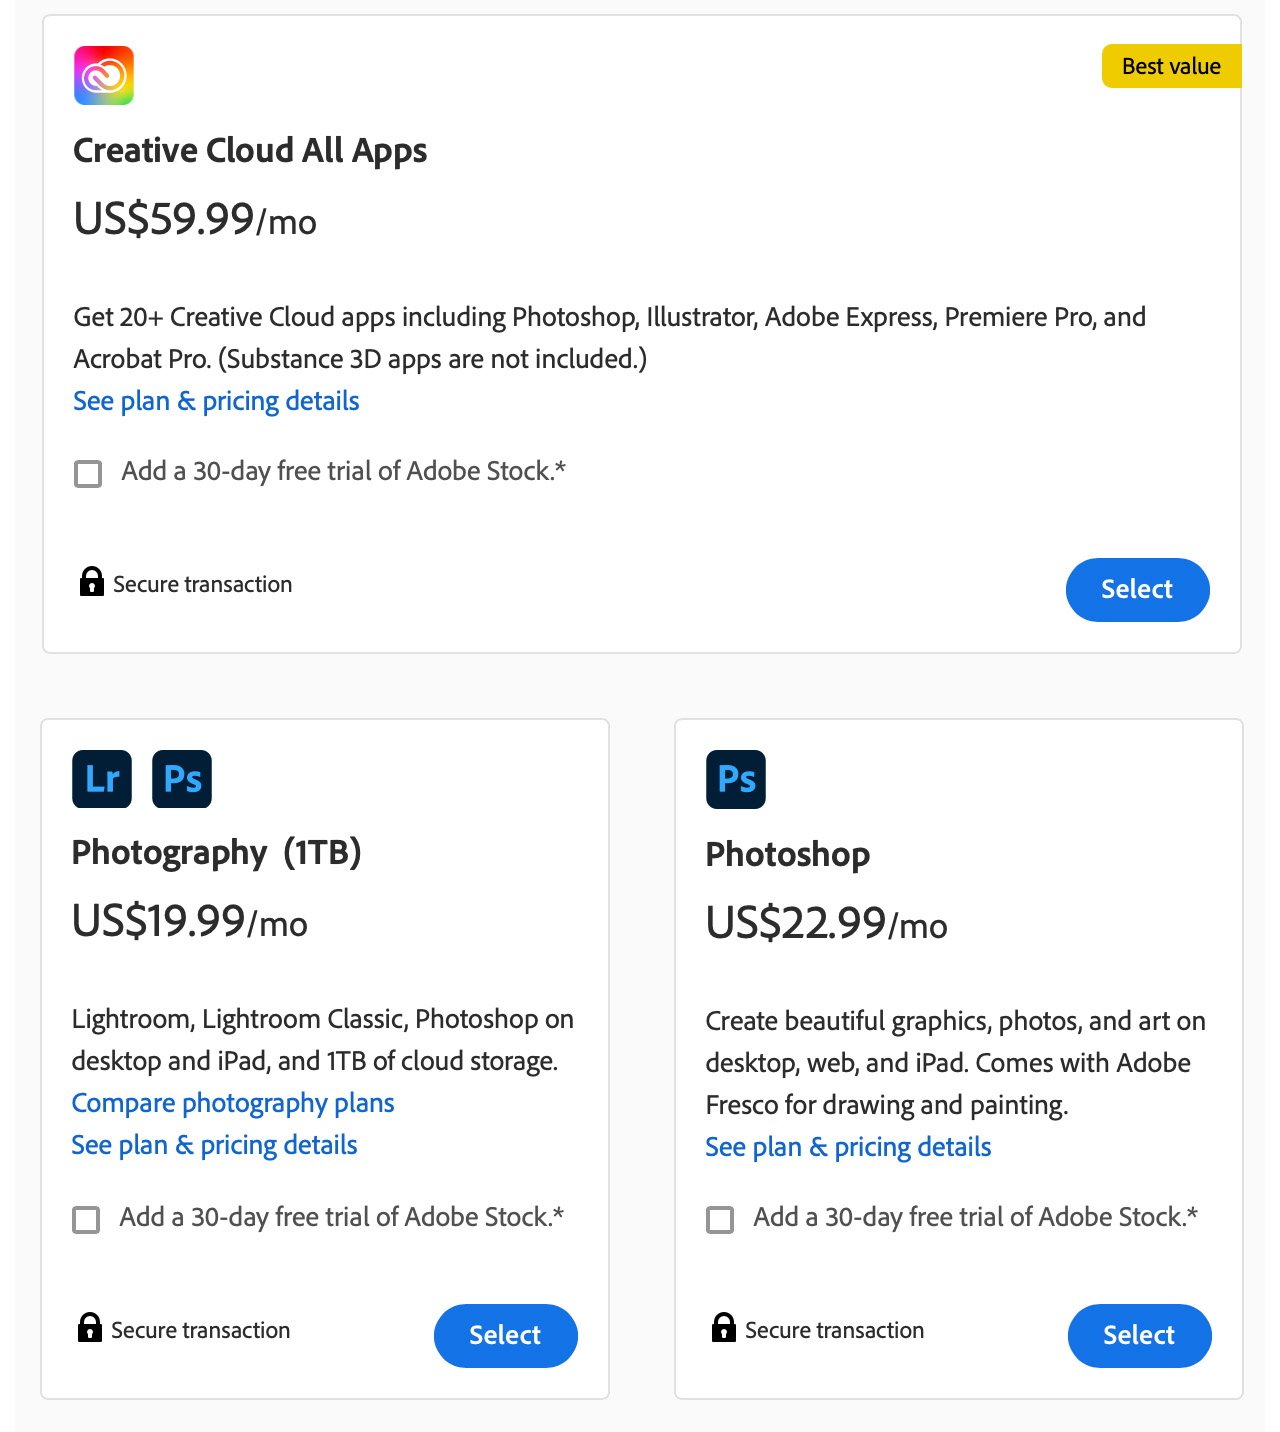 Screenshot of Adobe Creative Cloud subscription plans featuring pricing and brief descriptions for All Apps, Photography, and single Photoshop packages.